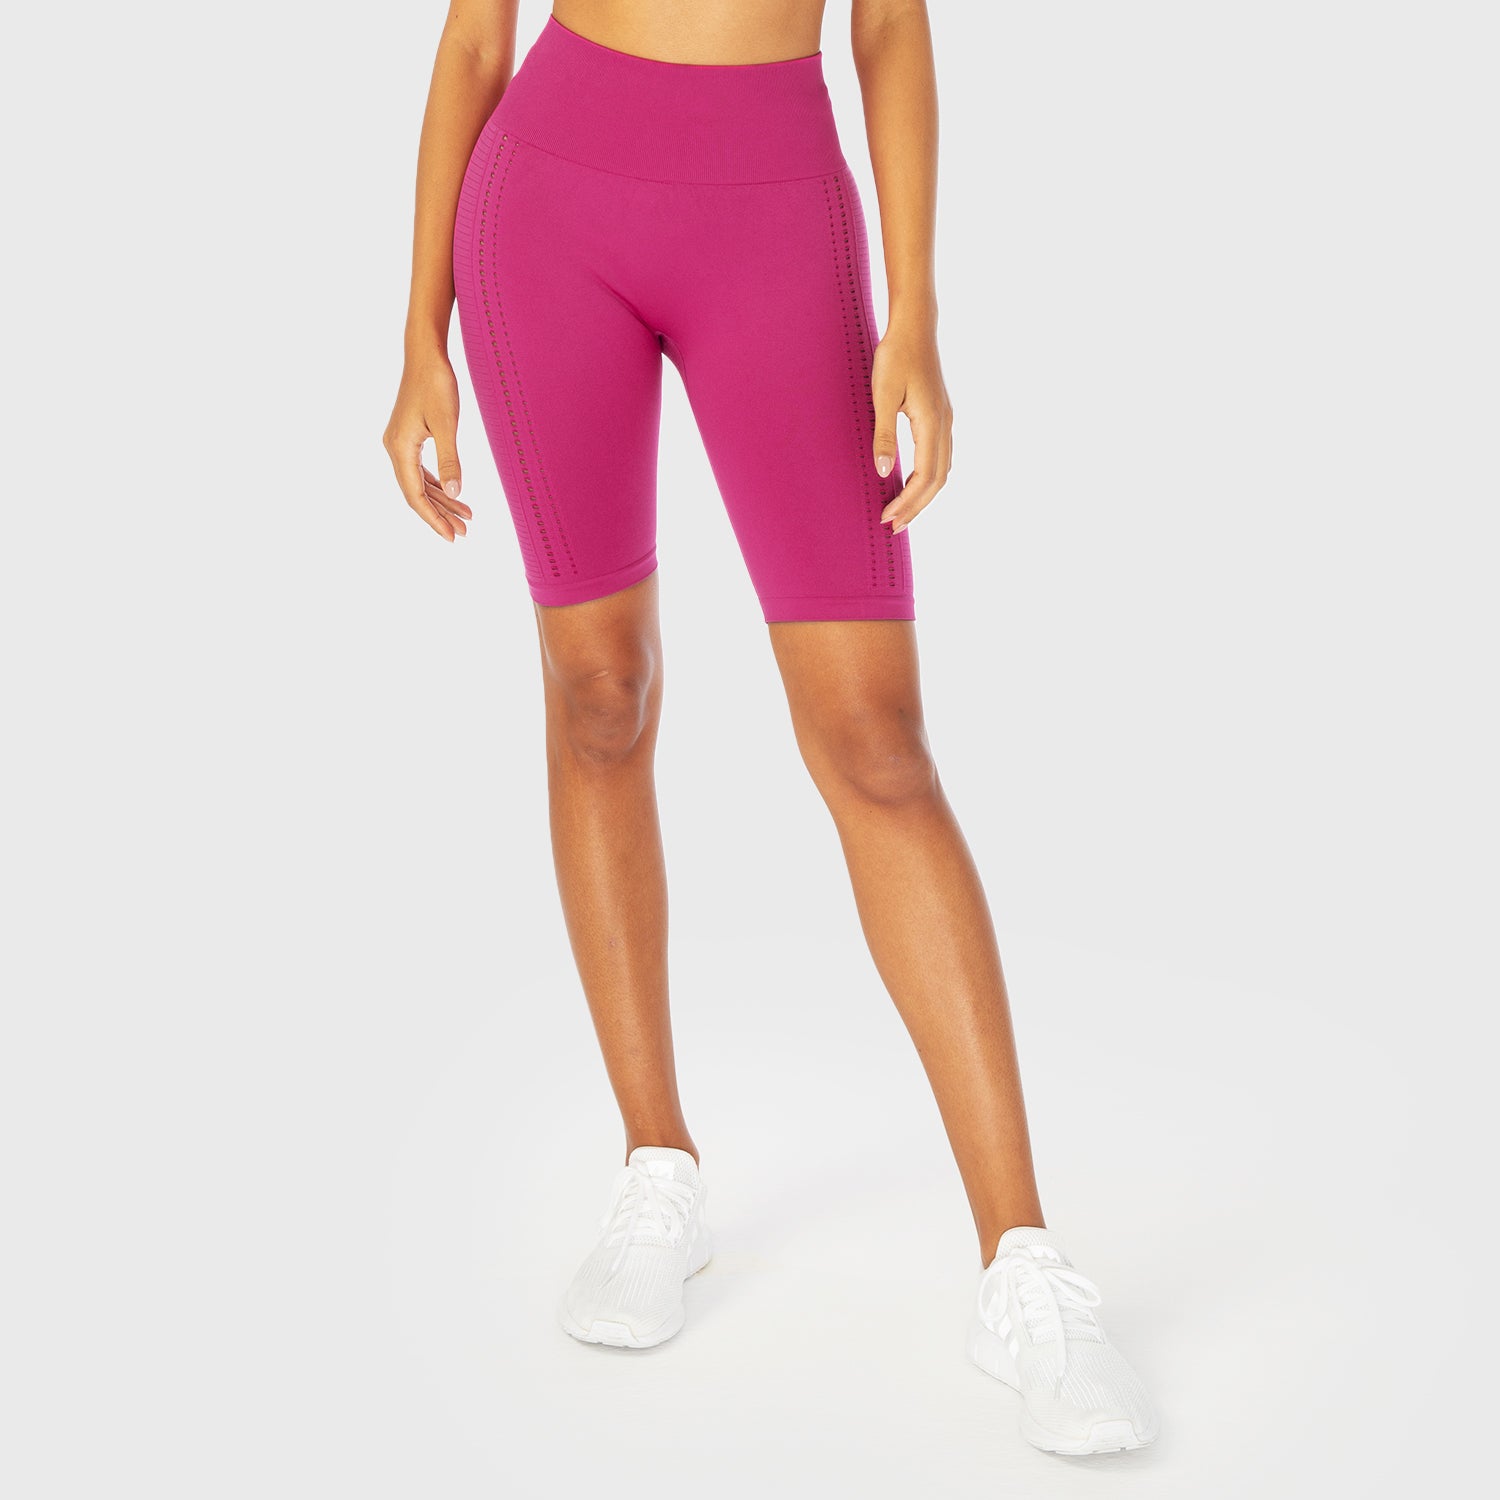 squatwolf-workout-clothes-infinity-seamless-workout-shorts-pink-gym-shorts-for-women